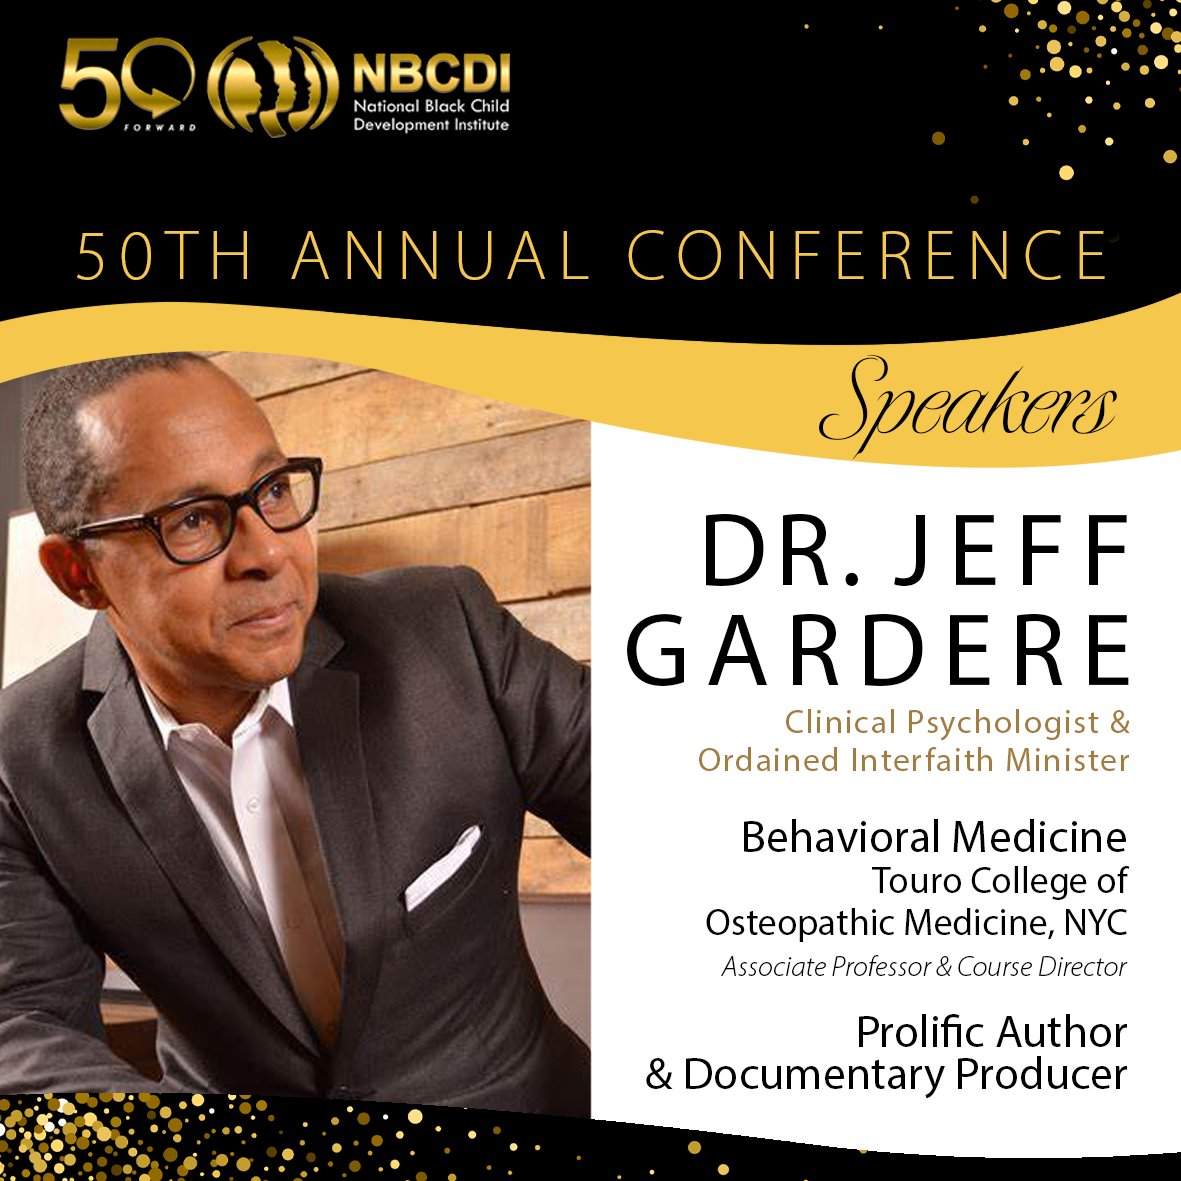 We are pleased to welcome @DrJeffGardere, he will participate in our featured session, “If Not Us Who? Black Children and Mental Health Workshop” on Thursday, October 14 at 2:30 PM EDT. If you haven’t registered, secure your spot today: l8r.it/EMKC